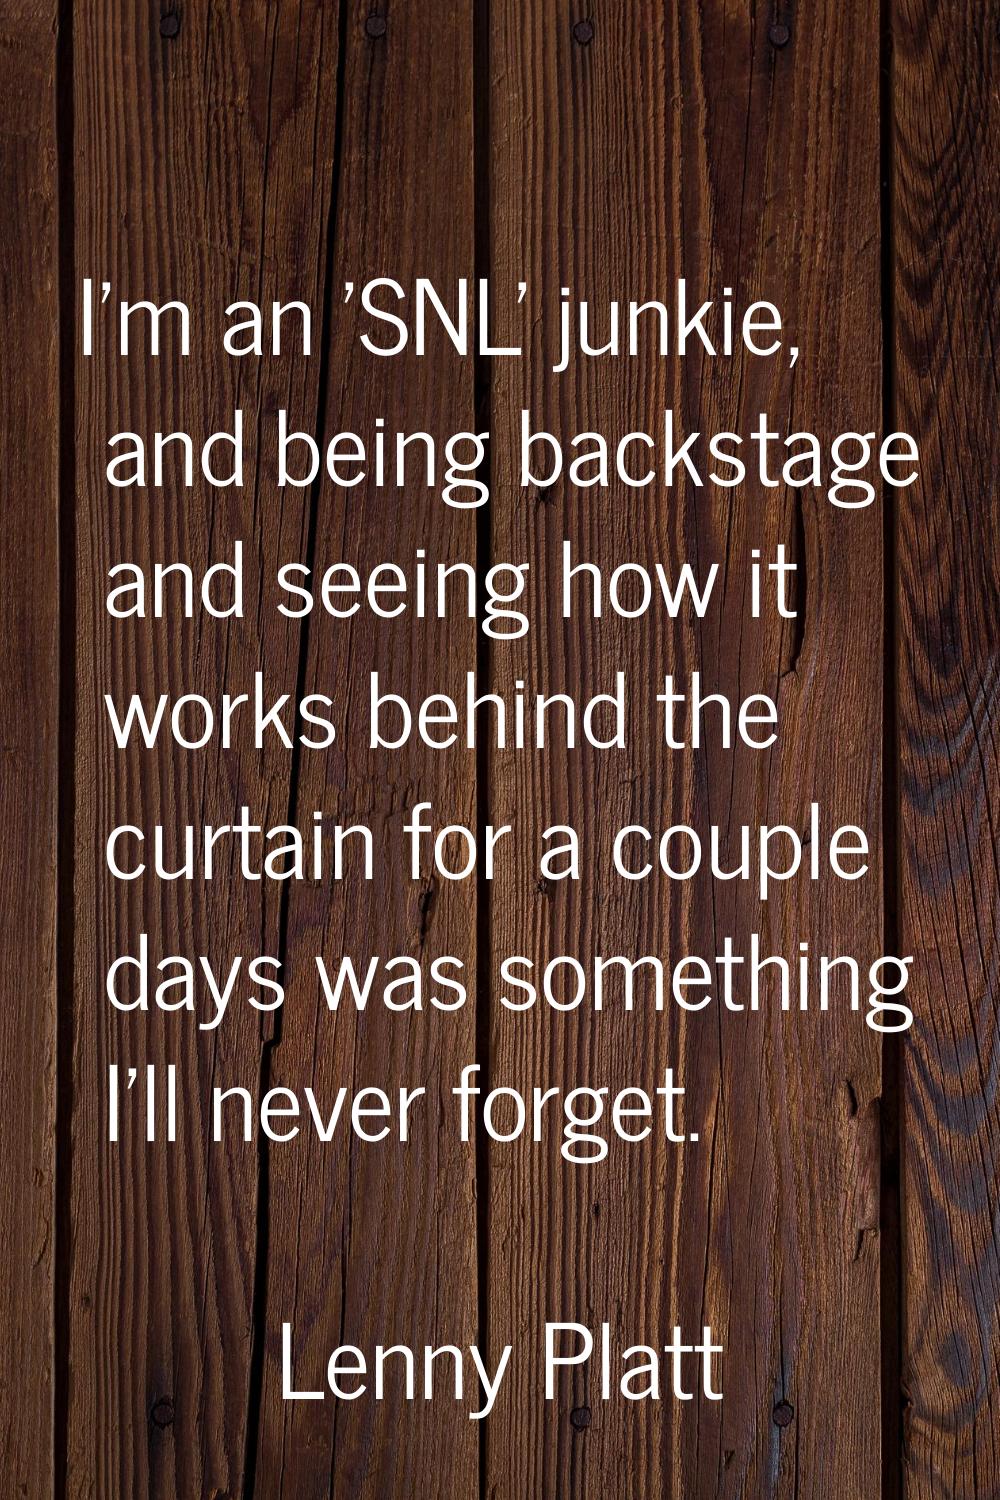 I'm an 'SNL' junkie, and being backstage and seeing how it works behind the curtain for a couple da